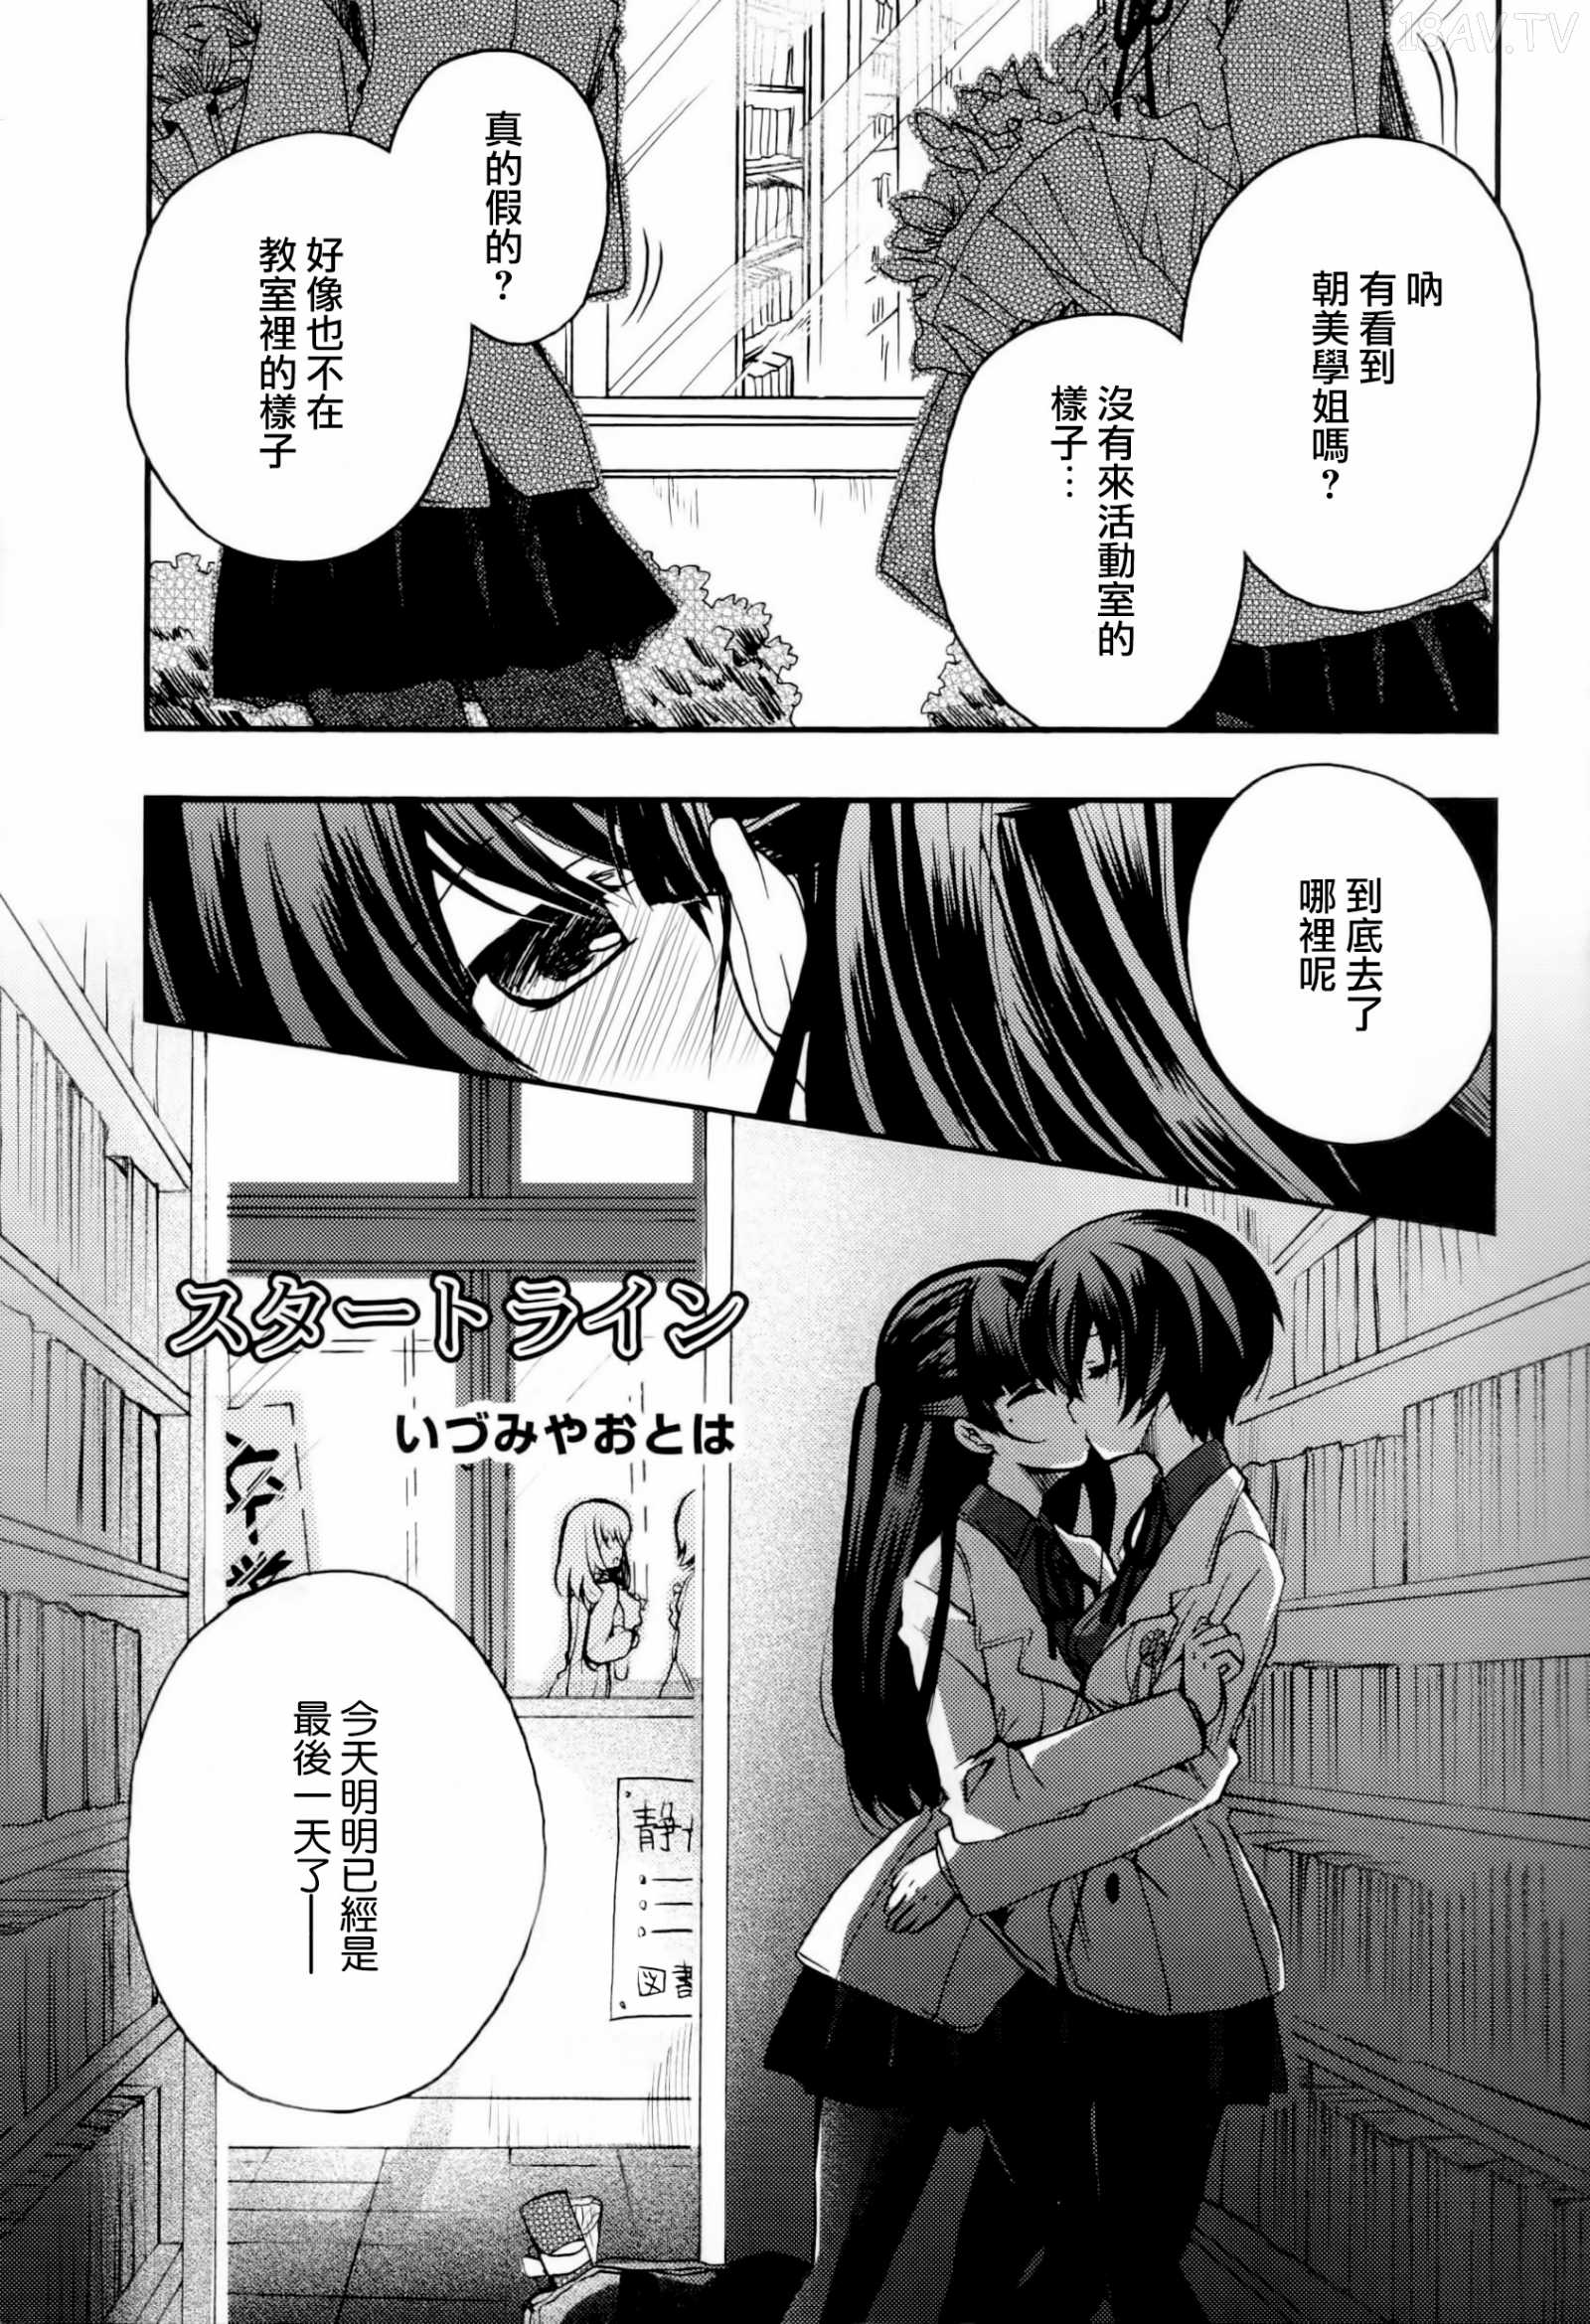 18H,18h漫畫,[アンソロジー] 黄百合～Falling In Love With A Classmate～ (OKS COMIX百合シリーズ)  [Dora烧鸡个人汉化]